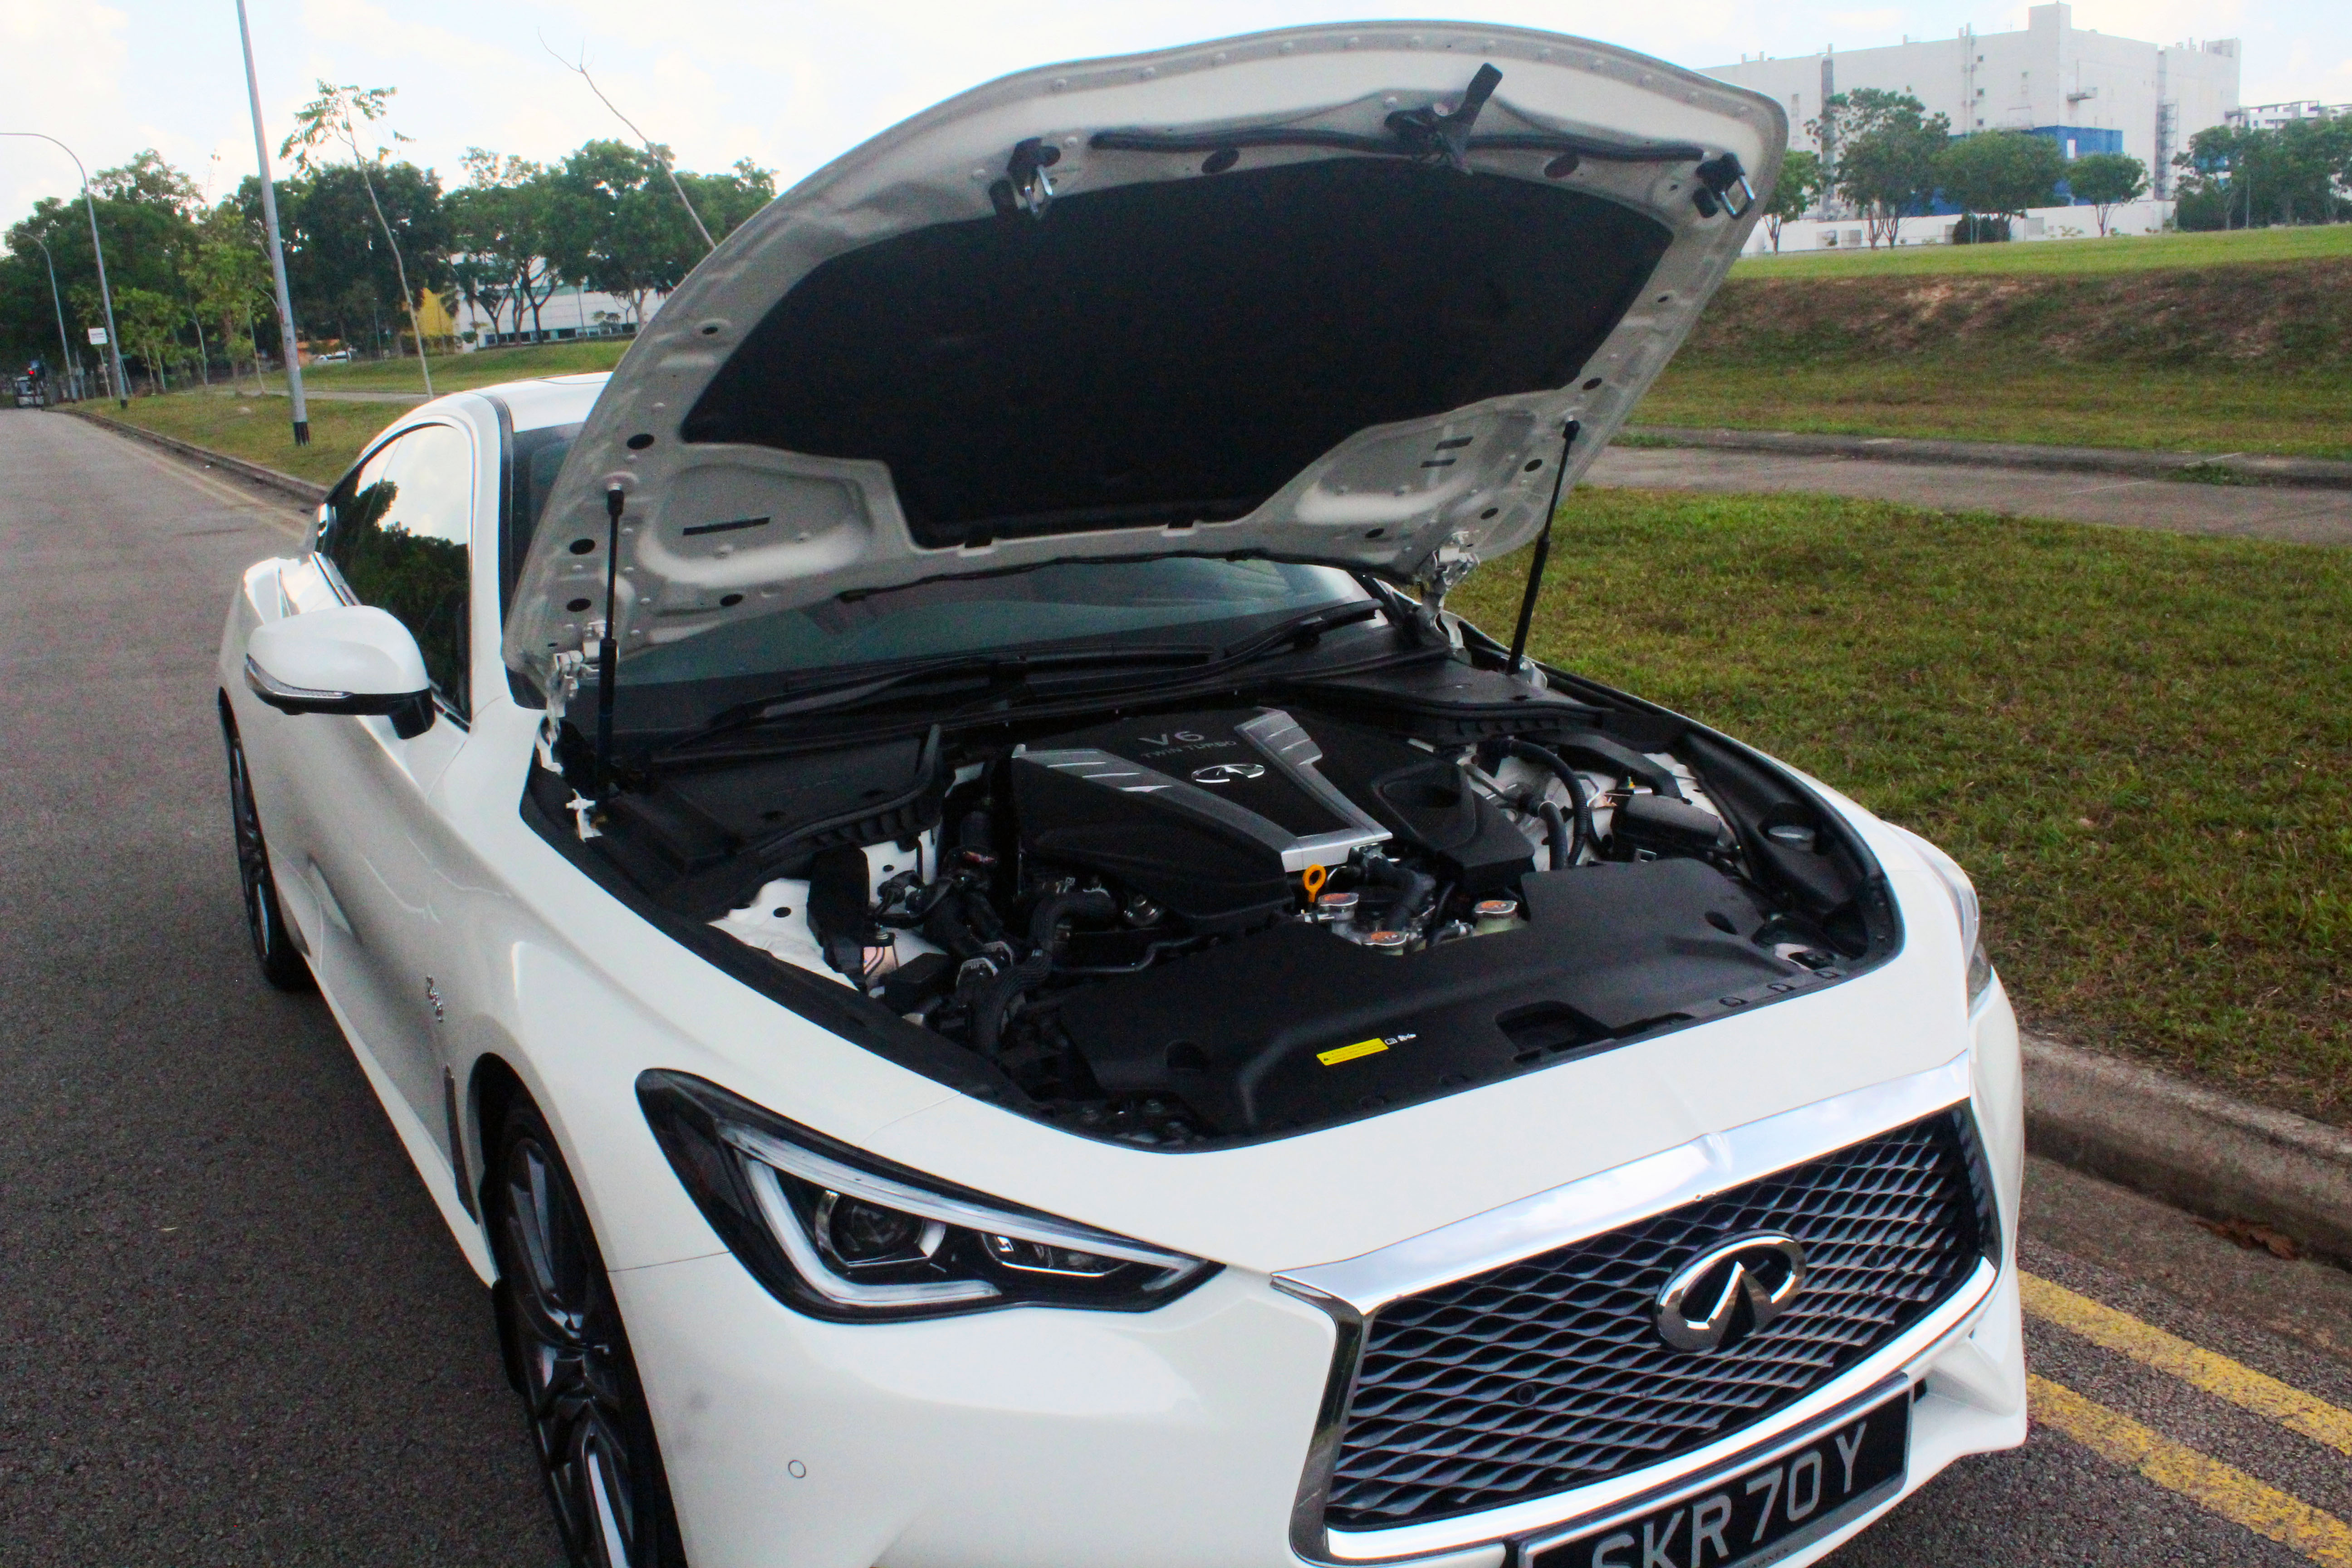 The Infiniti Q60 packs a punch under the hood